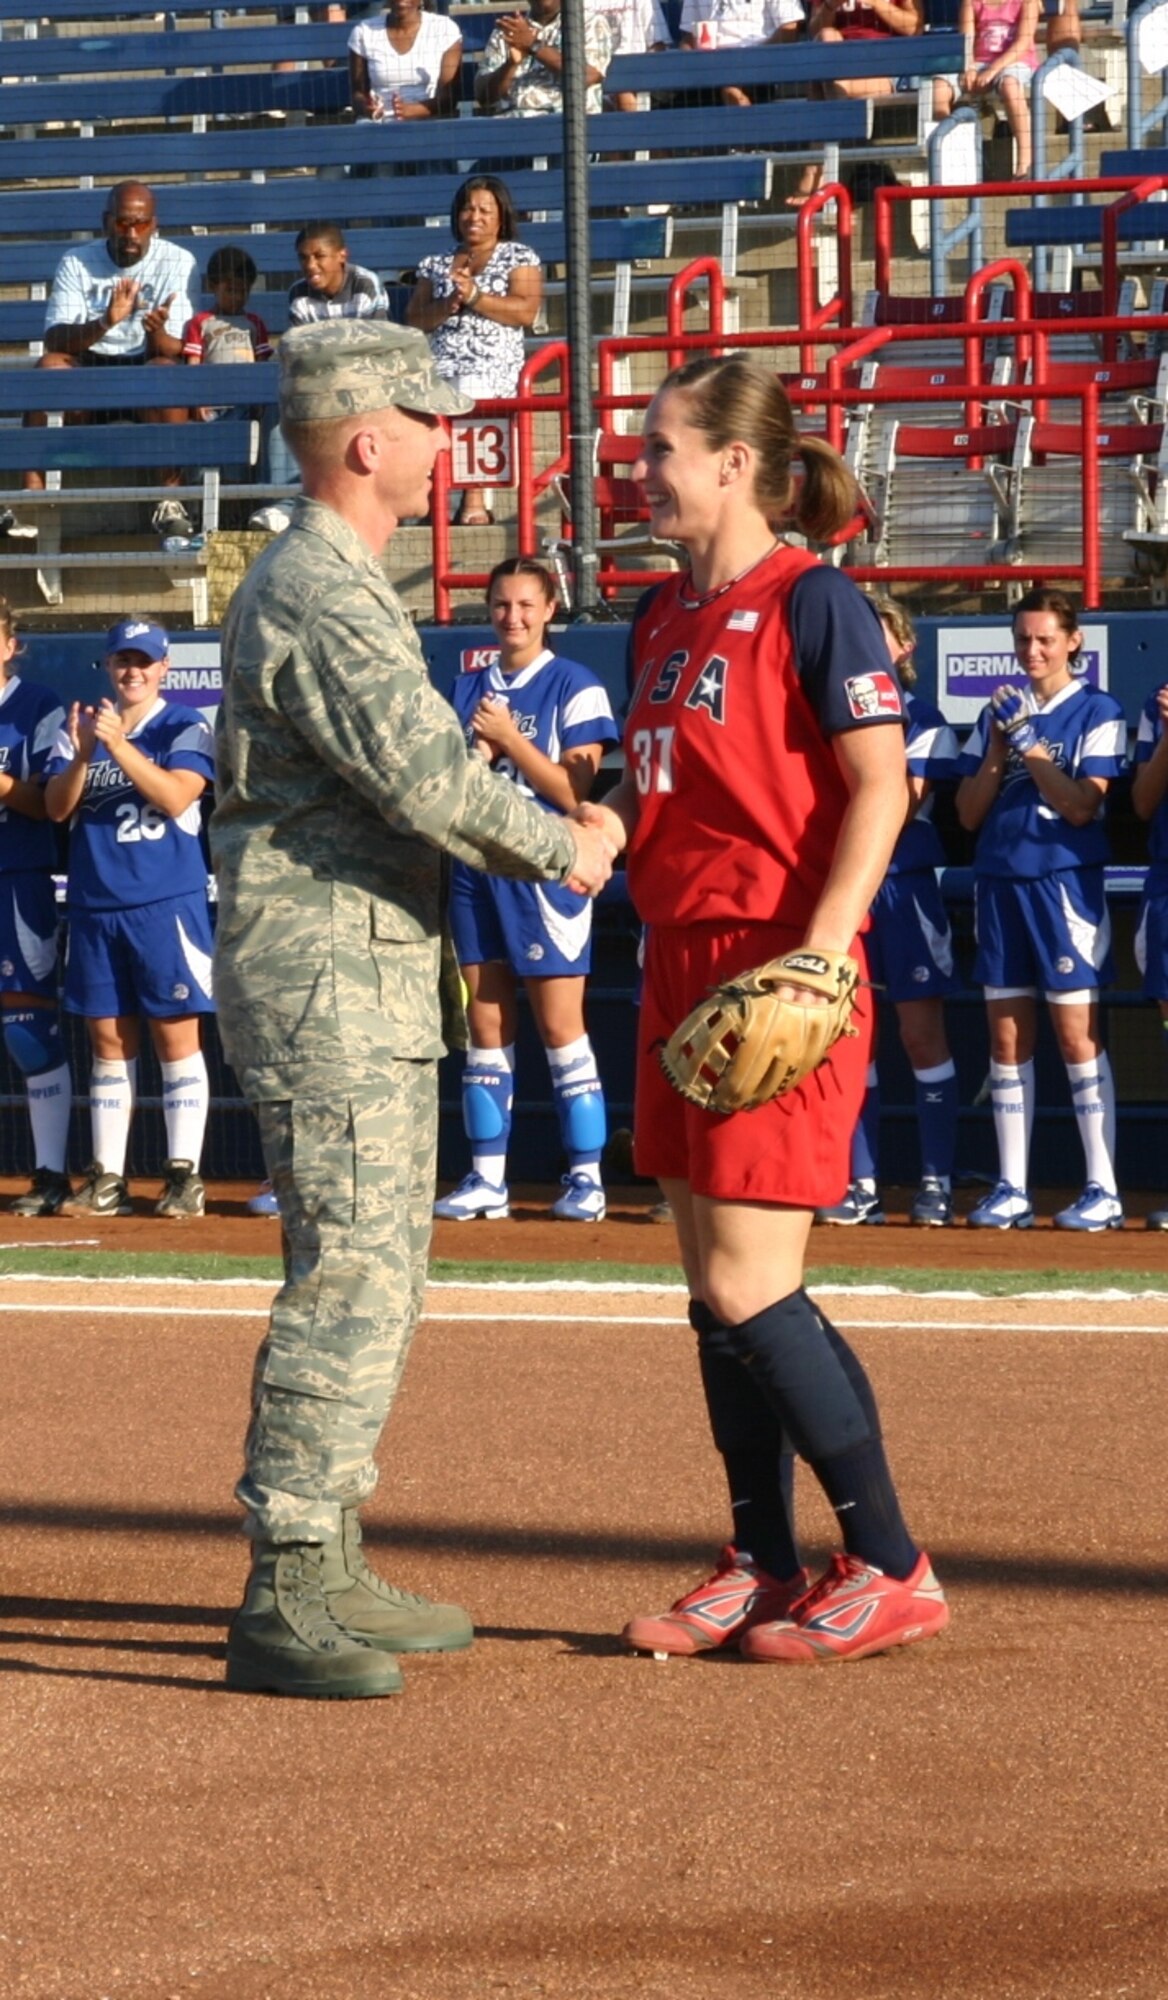 Col. Scott Forest, vice commander, 552 ACW, shakes the Team USA catcher's hand after throwing her the first pitch as part of Military Appreciation Night at the World Cup of Softball July 17.